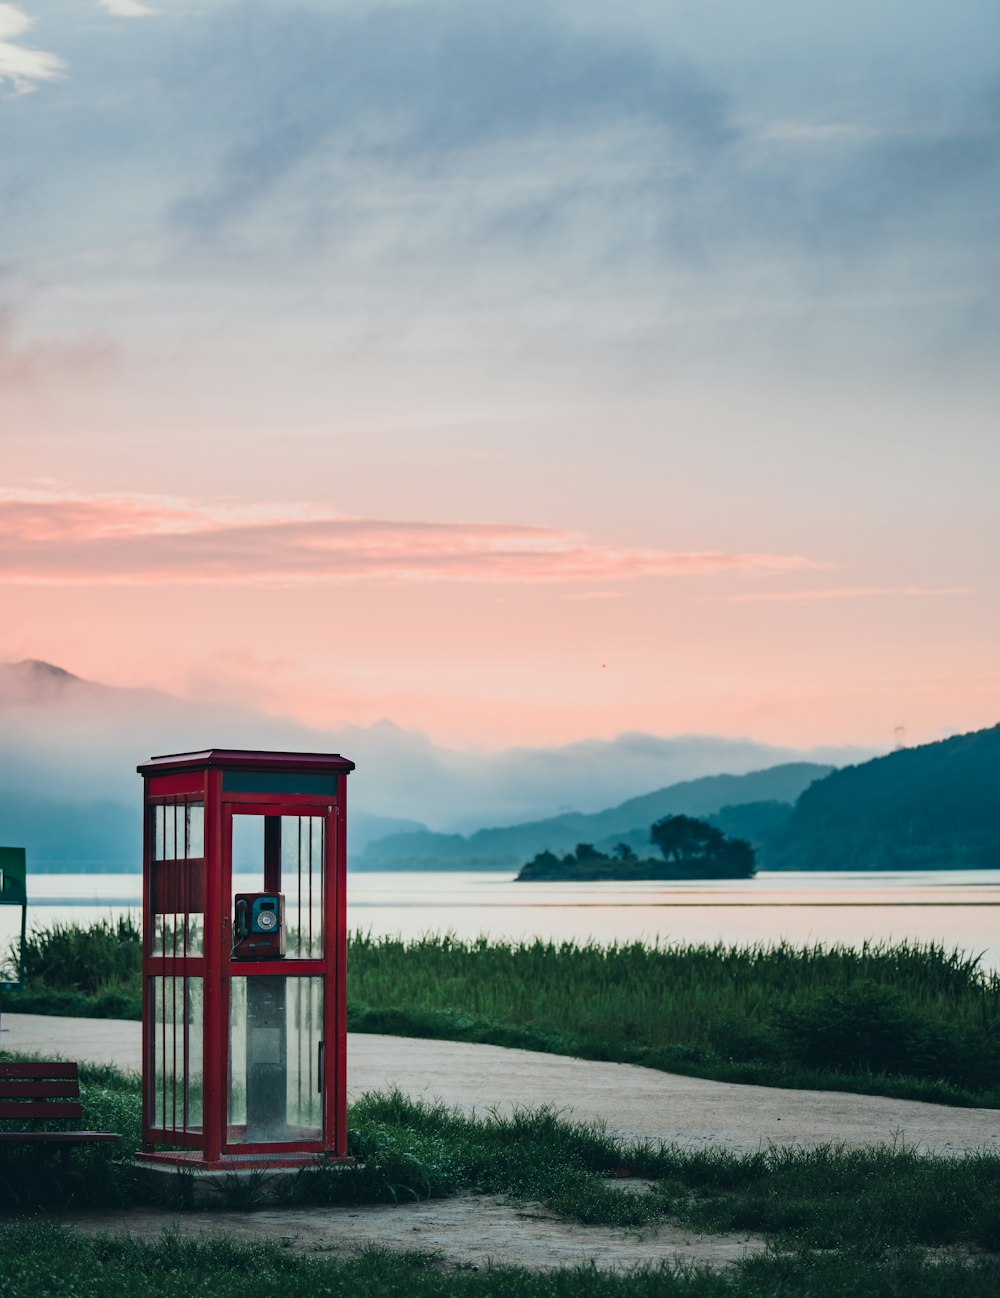 red telephone booth on lake side during daytime